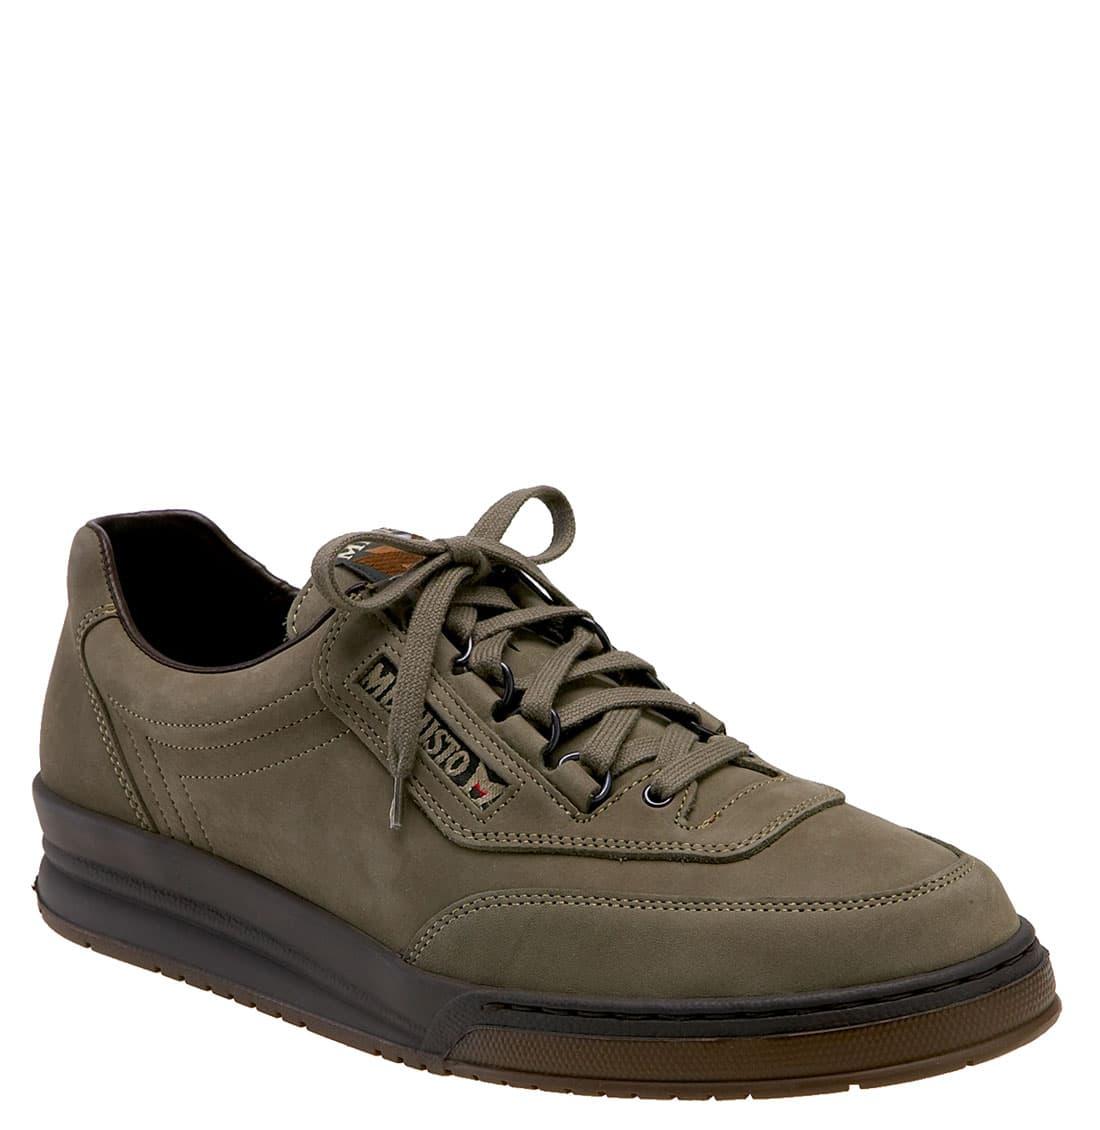 Mephisto Leather 'match' Walking Shoe in Brown for Men - Lyst